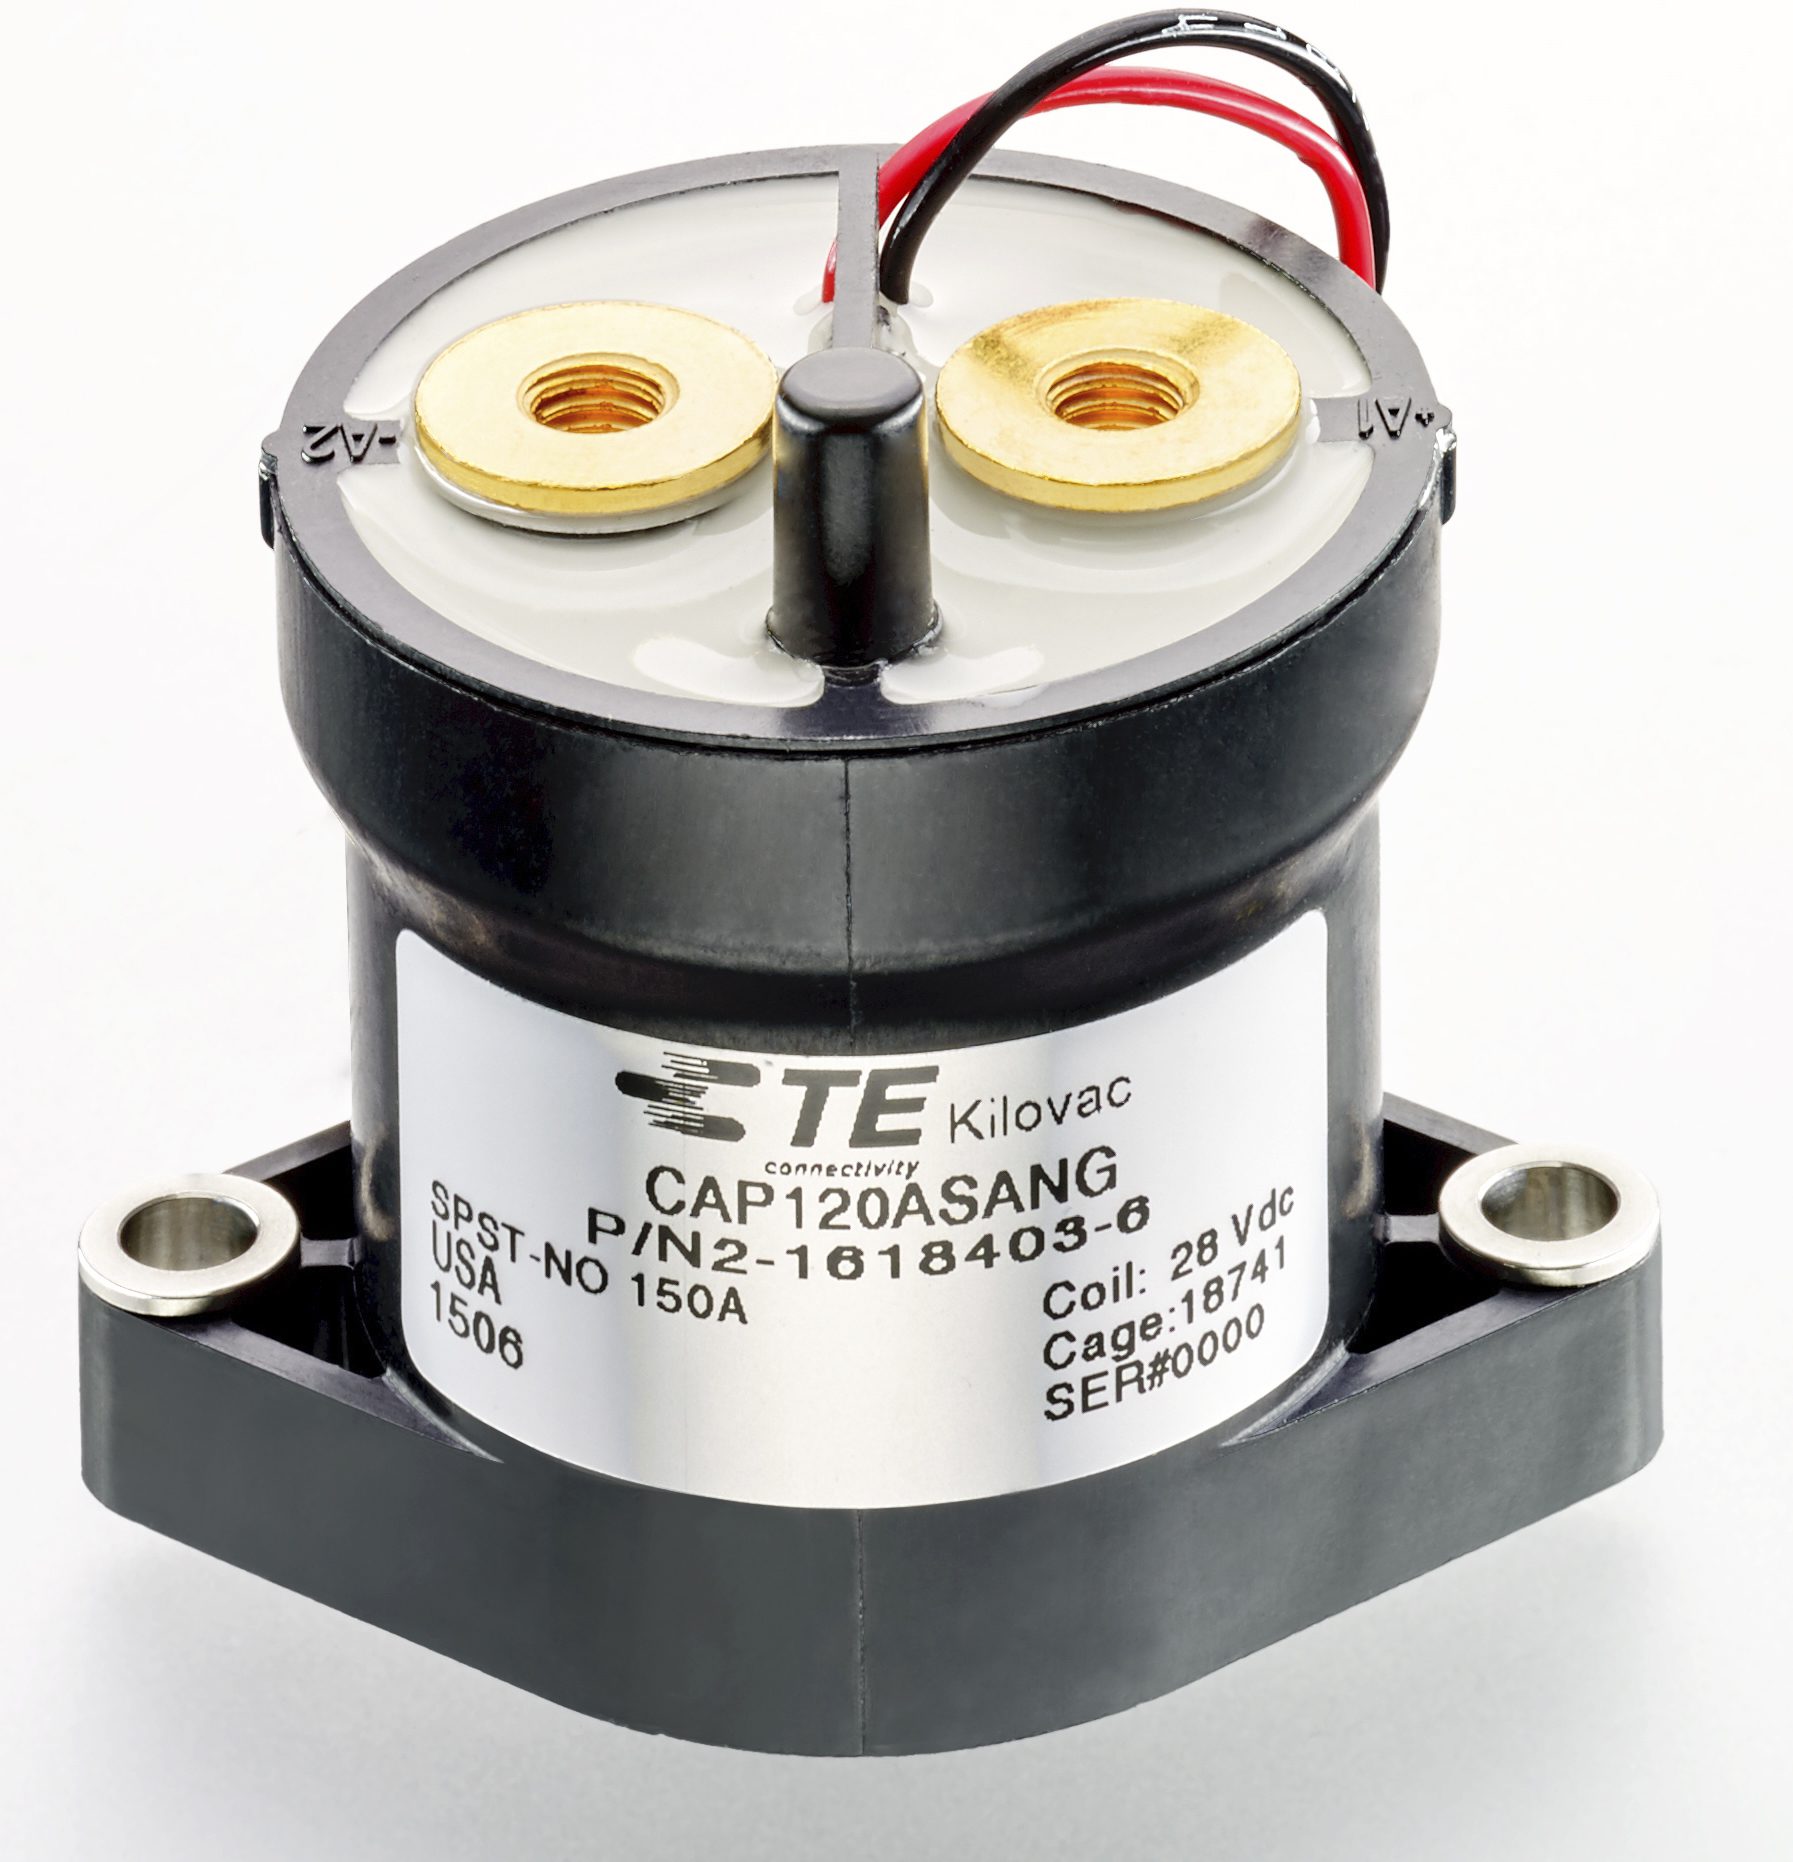 Designed for harsh environments and loads, TE Connectivity’s KILOVAC CAP120 contactor offers exceptional performance for small and light devices. A reduced-size version of the popular MAP and CAP series contactors, the CAP120 contactor’s small size and light weight opens up new application possibilities for 150A/600VDC devices. High break levels — 1,000A at 400VDC and 600A at 600VDC — help increase system flexibility and reliability. CAP120 contactors also provide reliable and long-lasting performance in UAM applications.